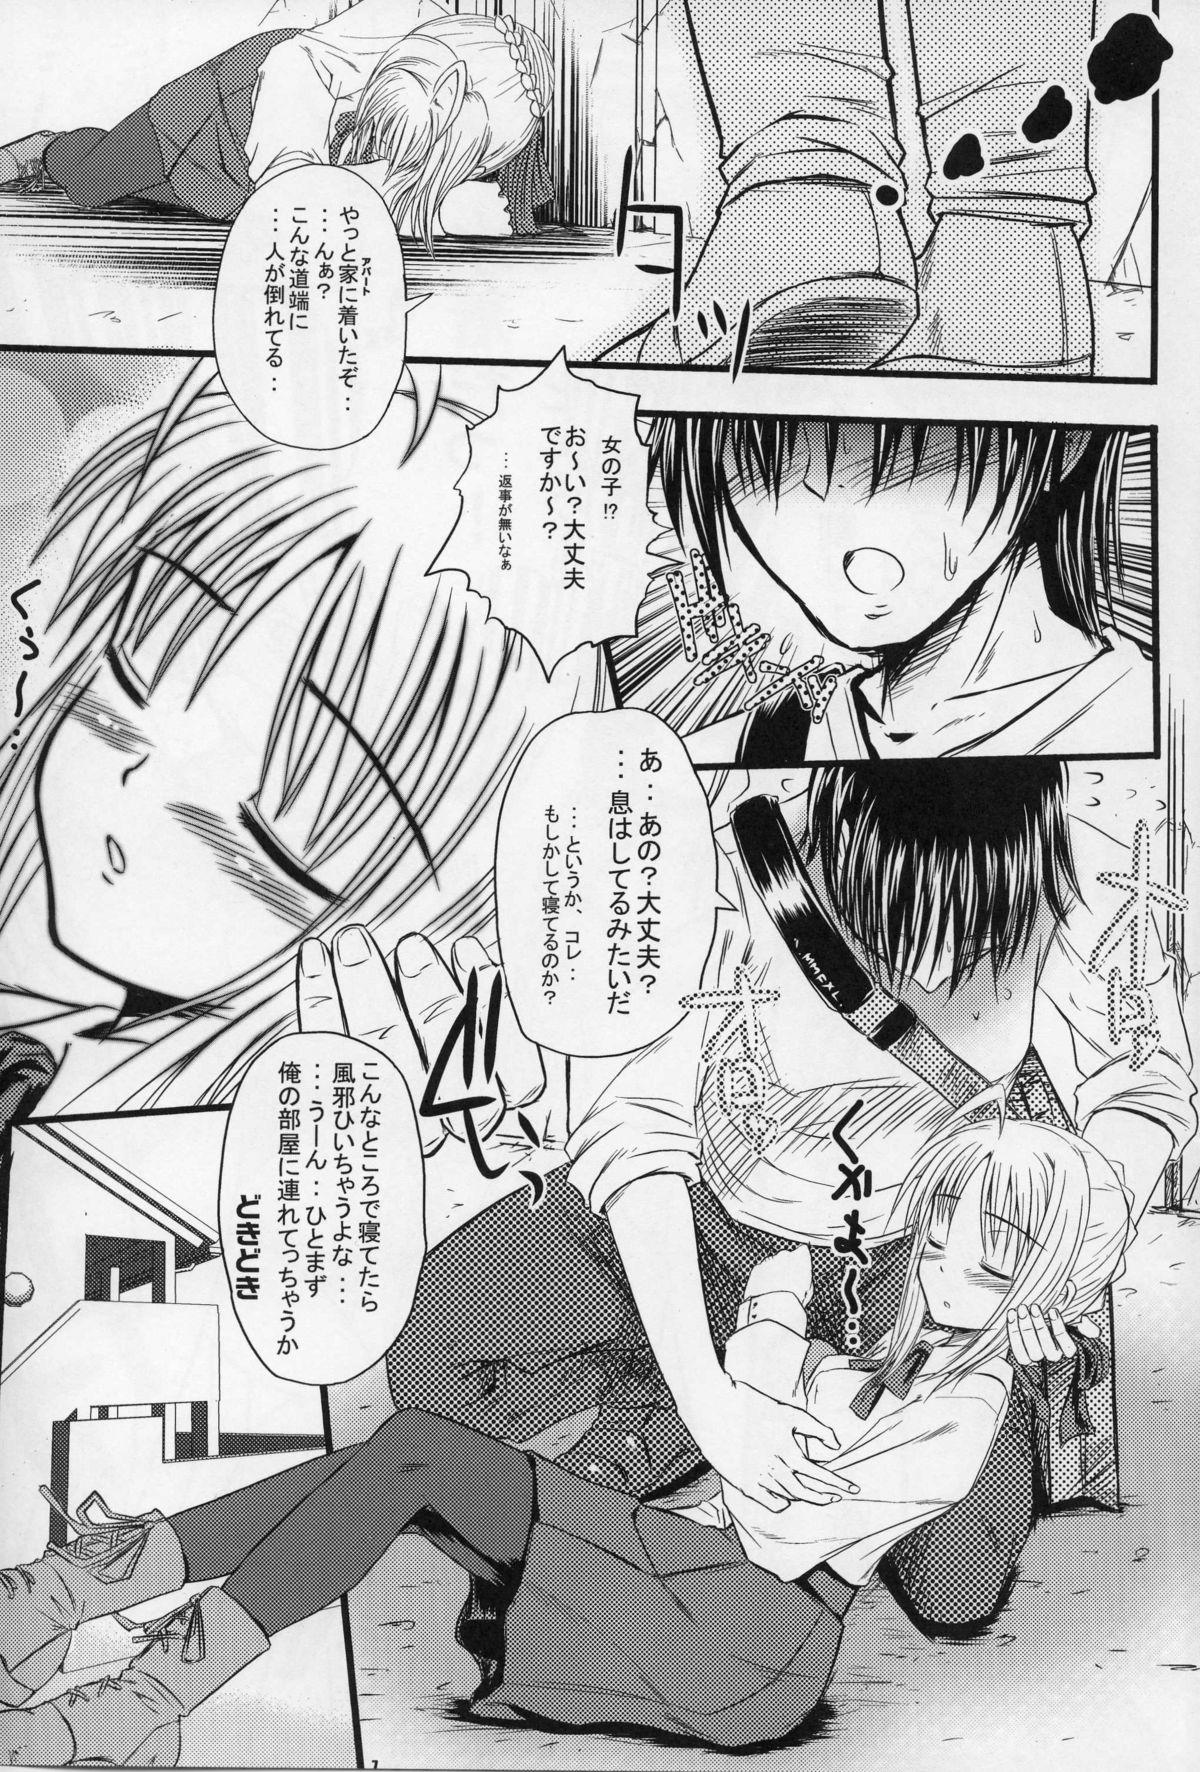 Whores Saber of Stripes. - Fate stay night Amateur Asian - Page 4